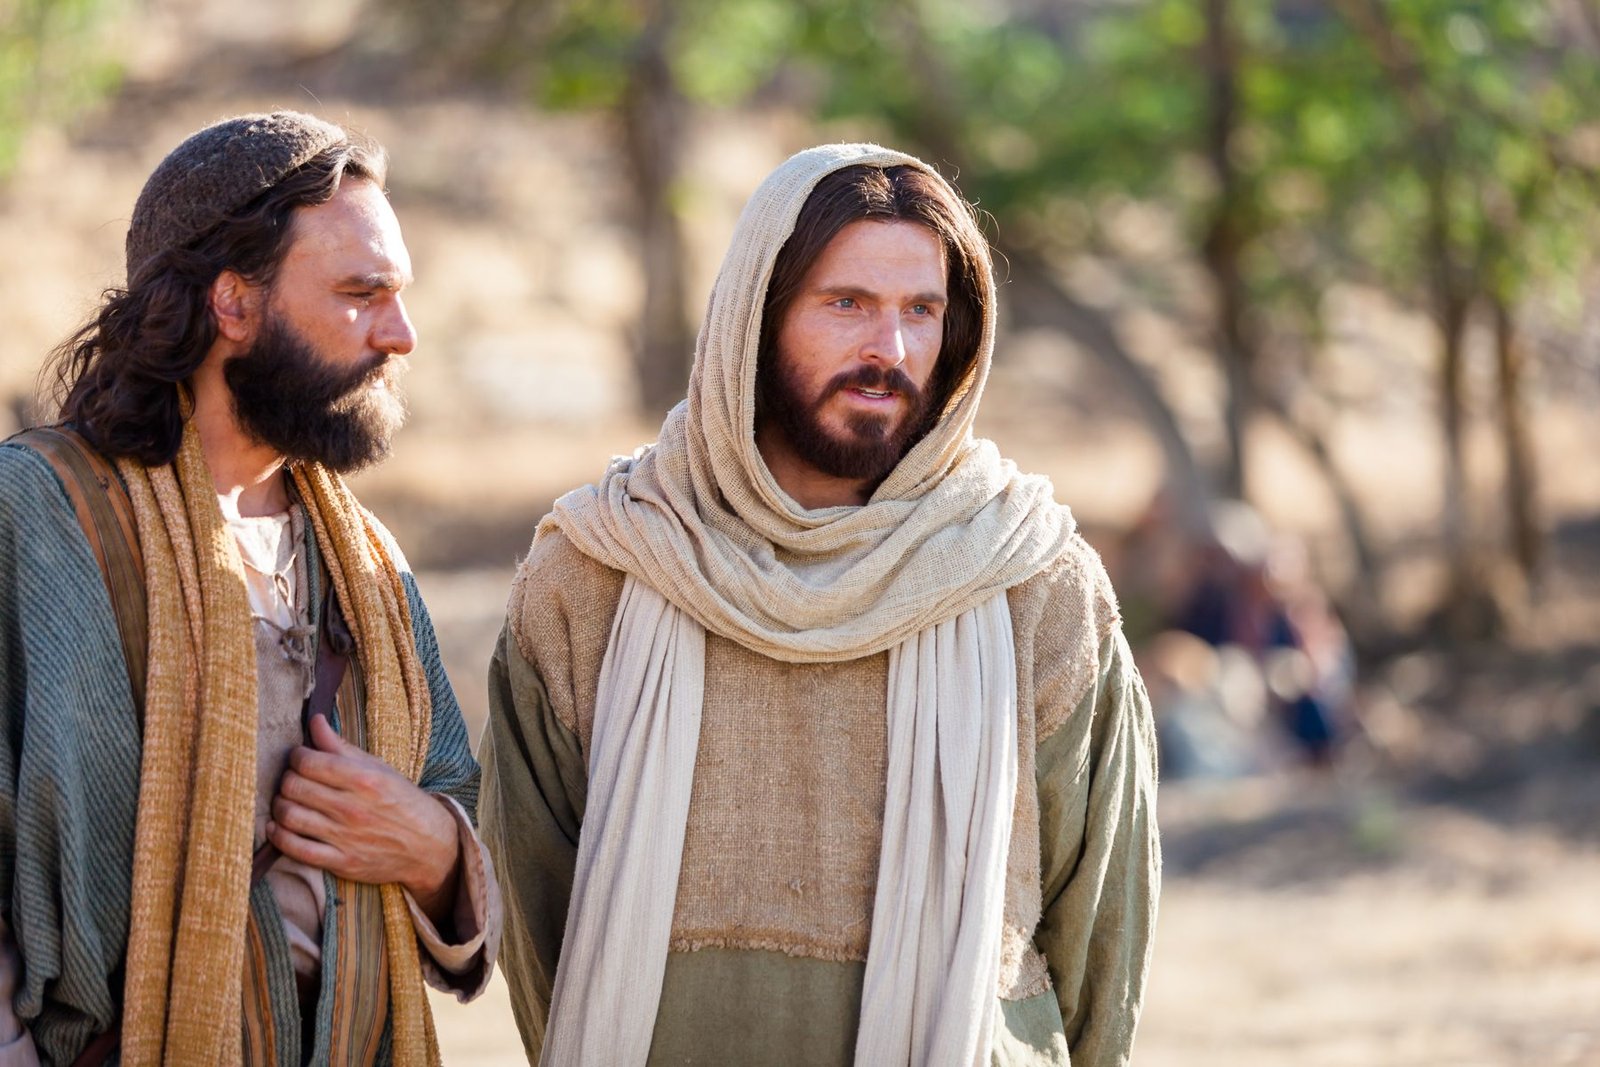 Today’s Gospel – Persecution and Eternal Life